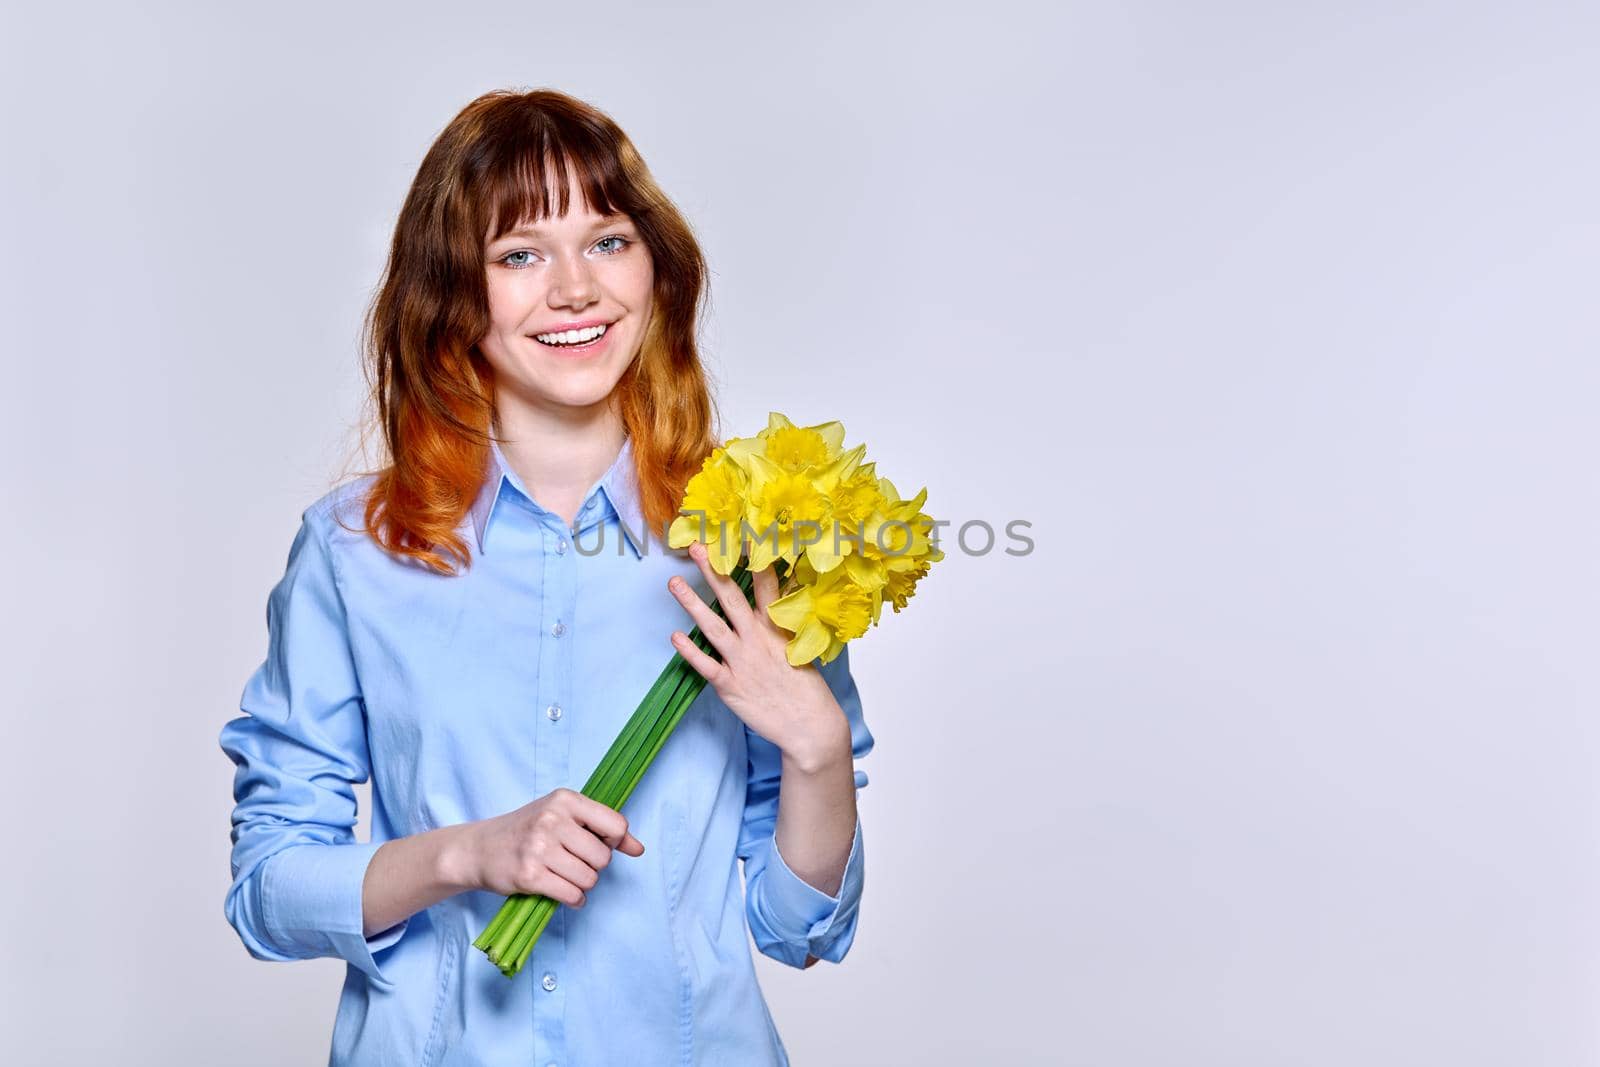 Portrait of young woman with bouquet of yellow flowers looking at camera, copy space, light background. Beautiful happy red-haired teenage female in blue shirt. Happiness, joy, holiday, beauty, youth